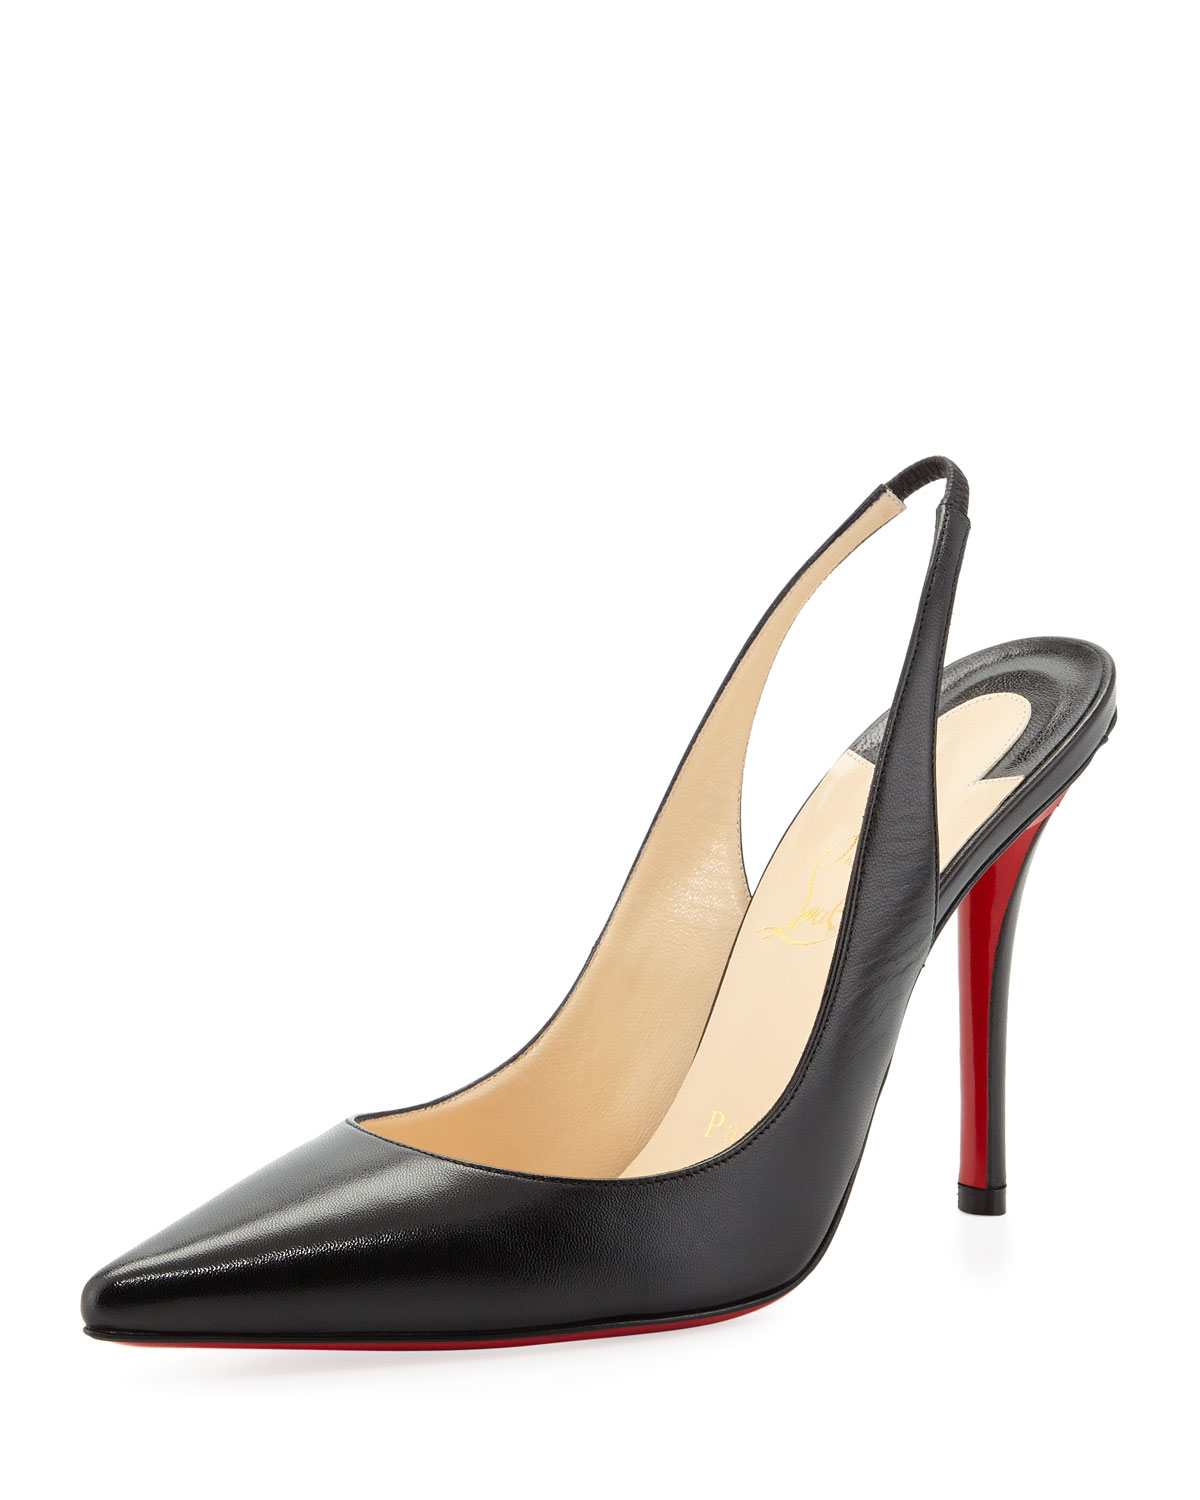 Lyst - Christian Louboutin Apostrophe Red-sole Slingback Pump in Black